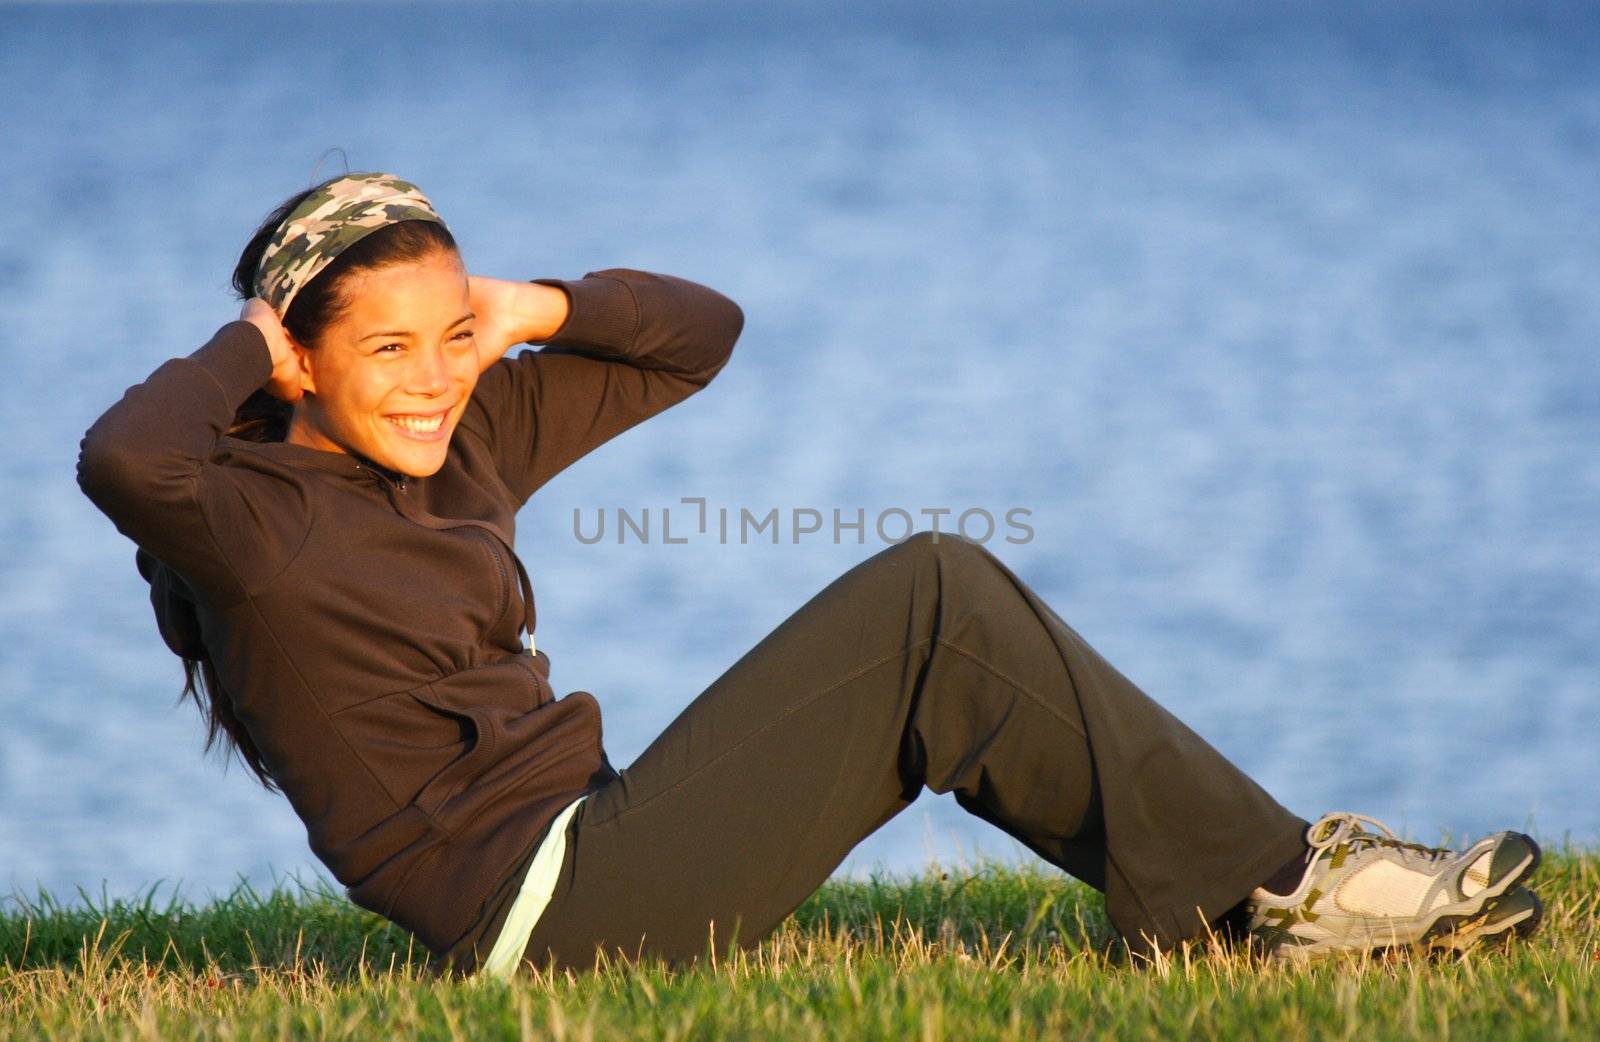 Woman doing situps / exercise outdoors on grass with the ocean in the background